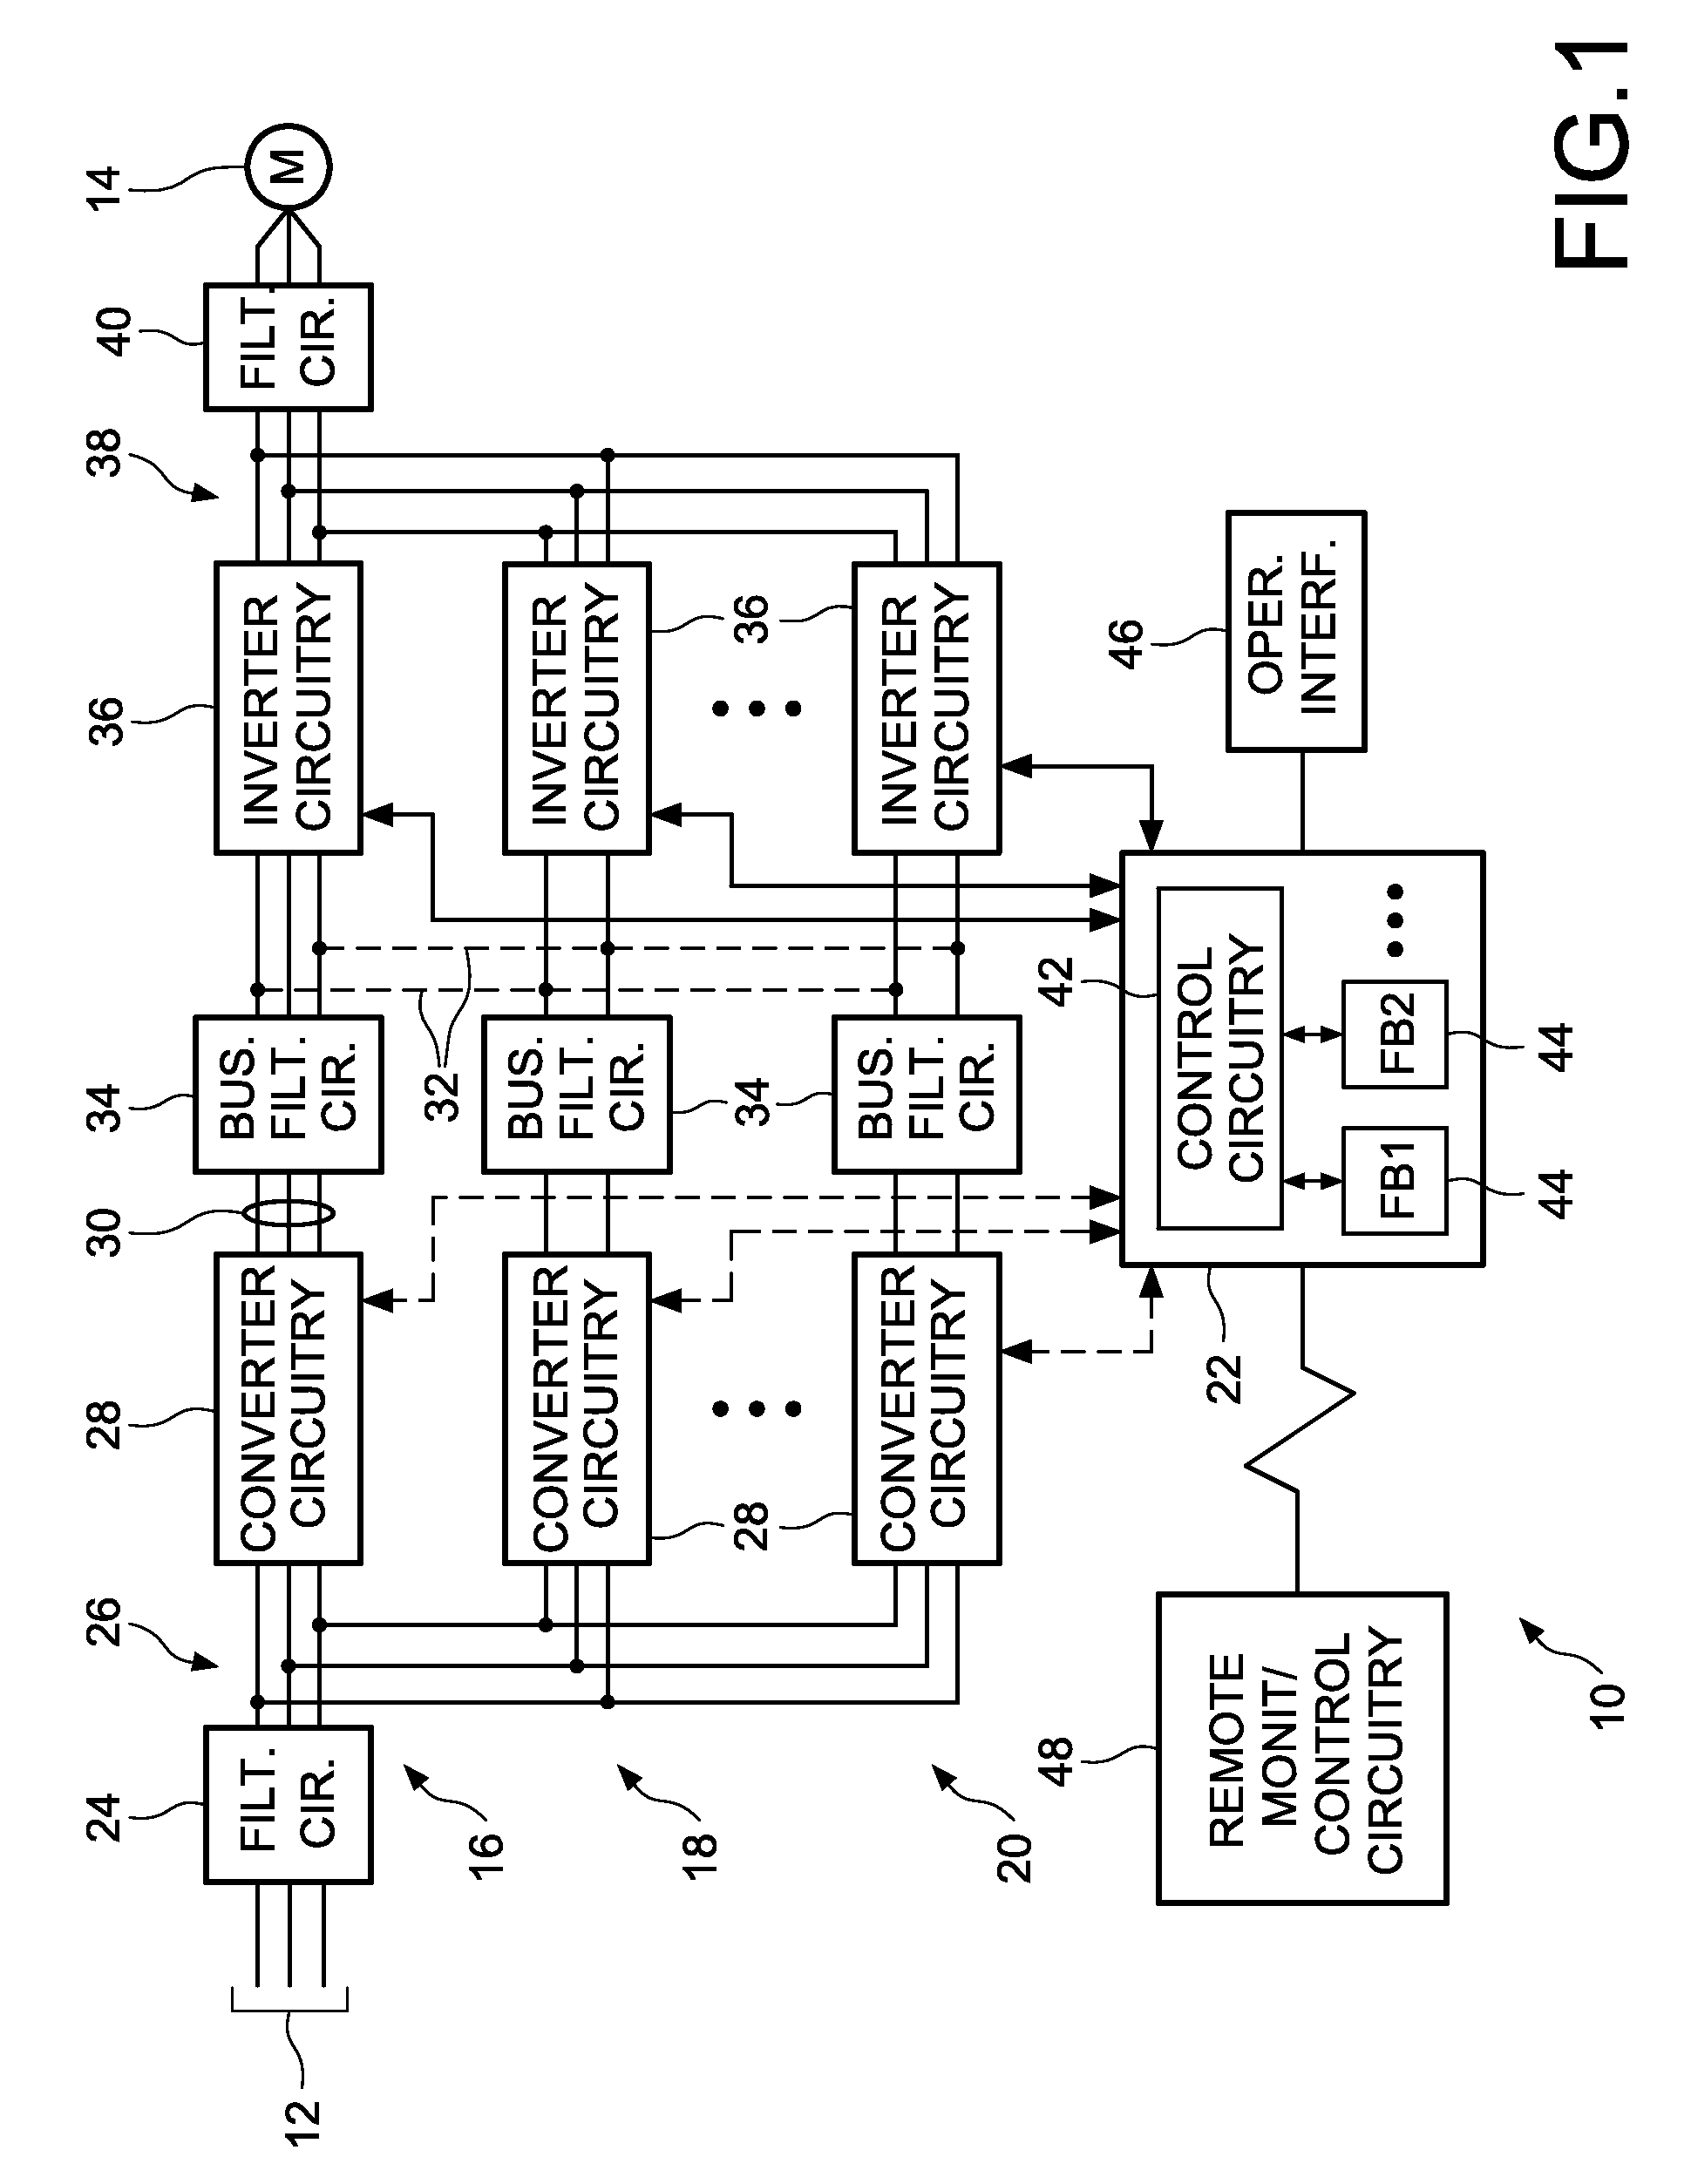 Heat sink cooling arrangement for multiple power electronic circuits